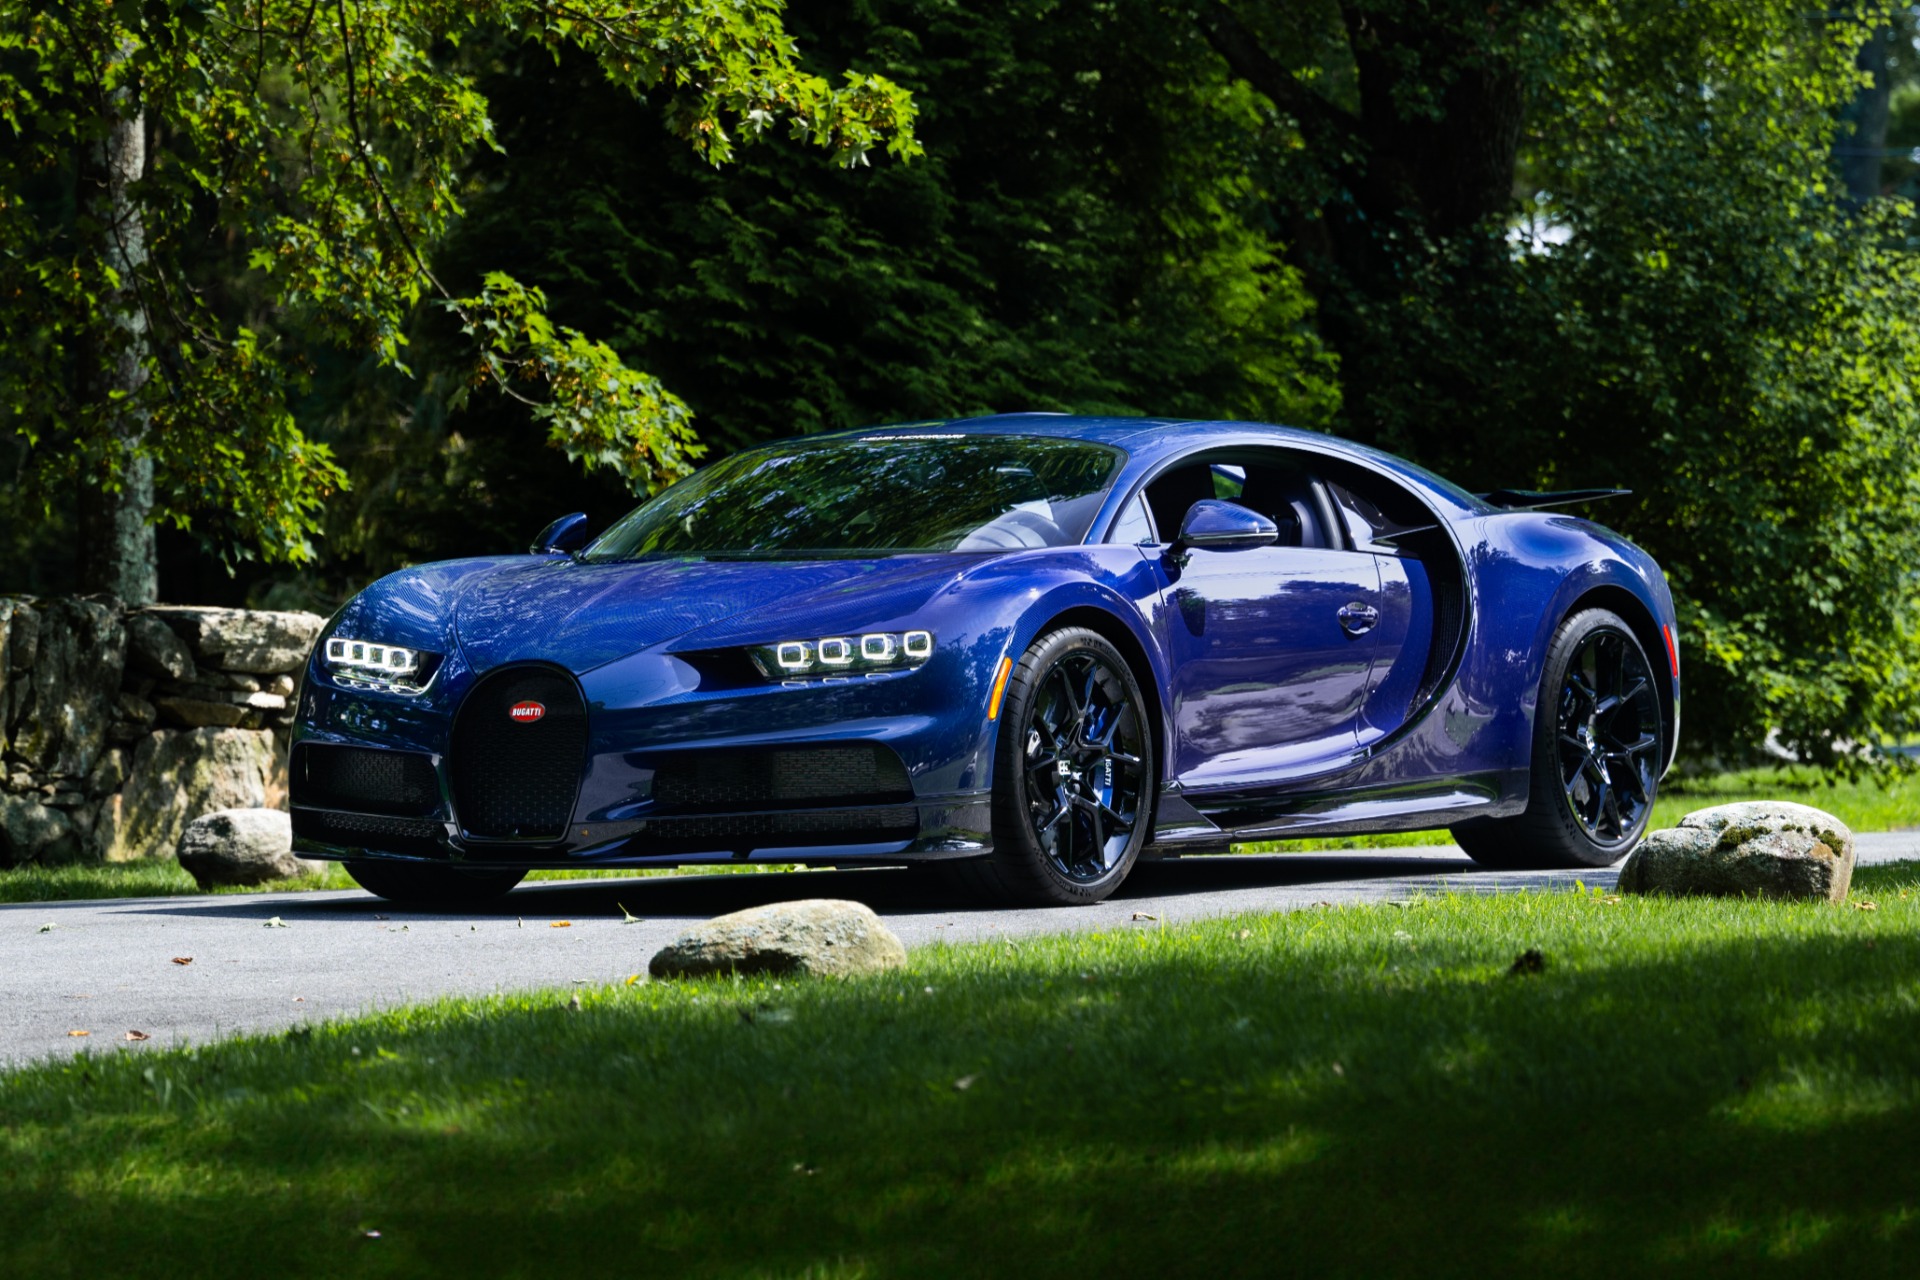 Used 2018 Bugatti Chiron Chiron for sale Sold at Aston Martin of Greenwich in Greenwich CT 06830 1